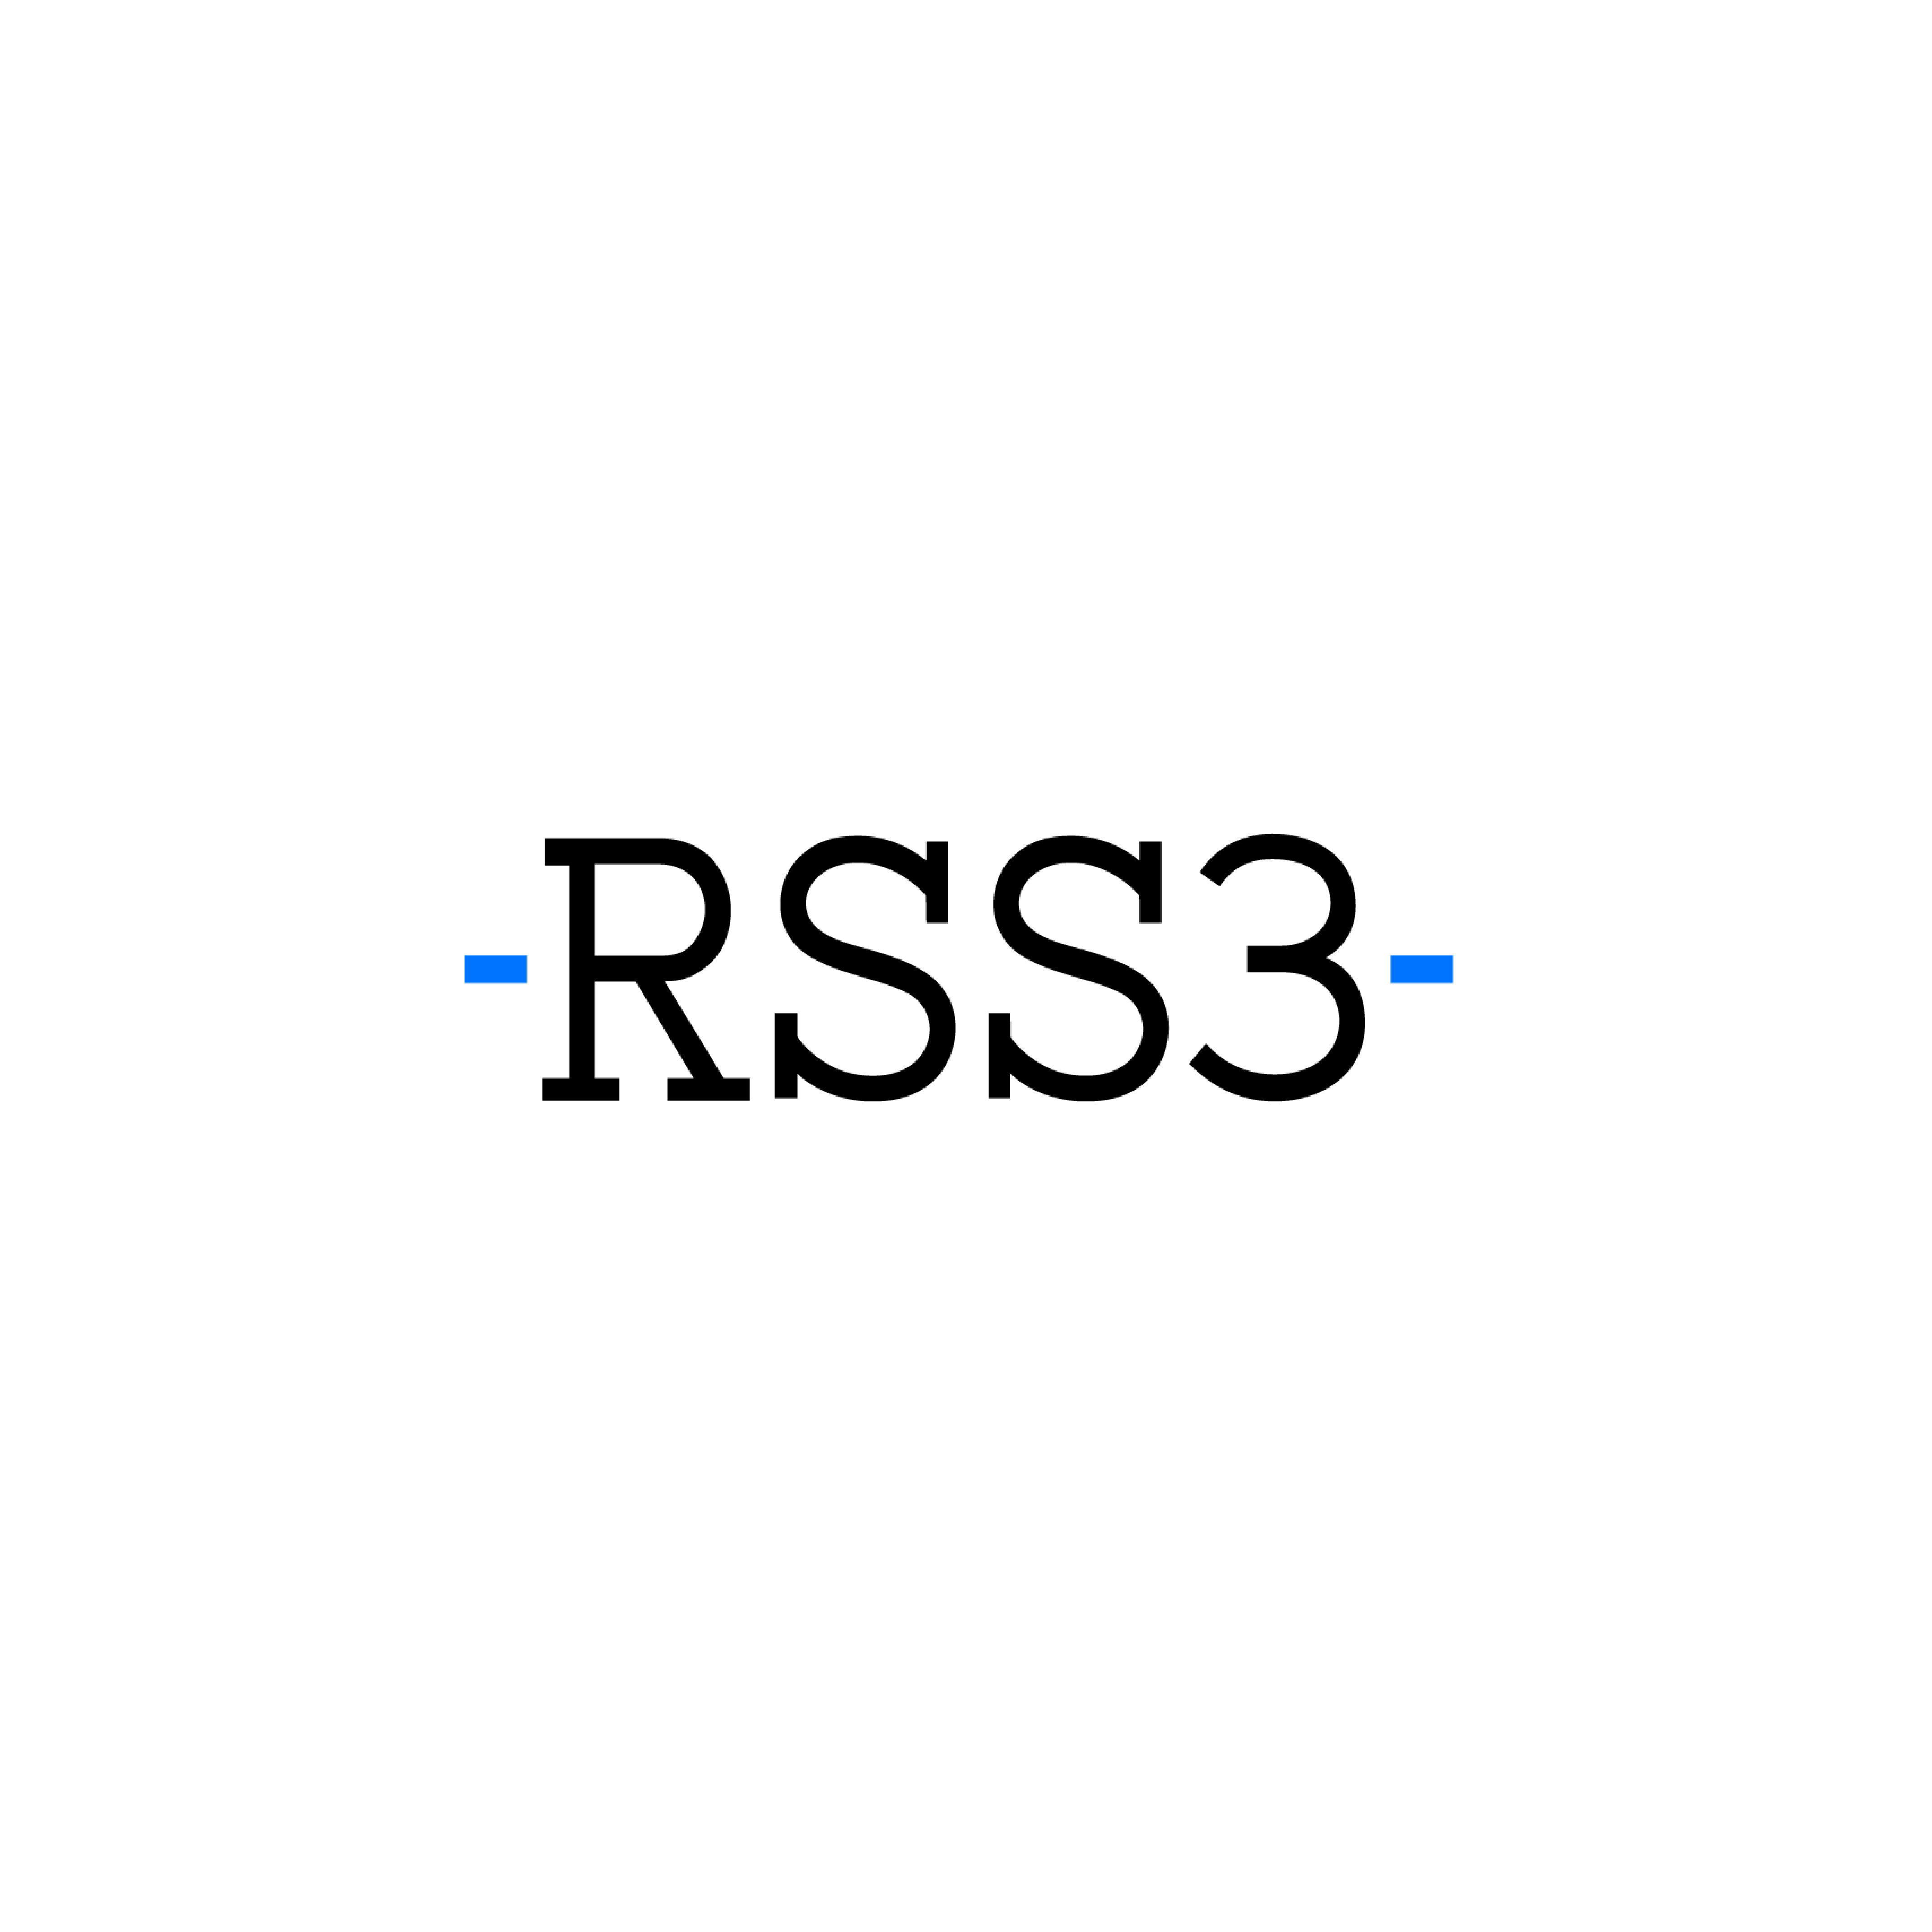 RSS3 (RSS3) information